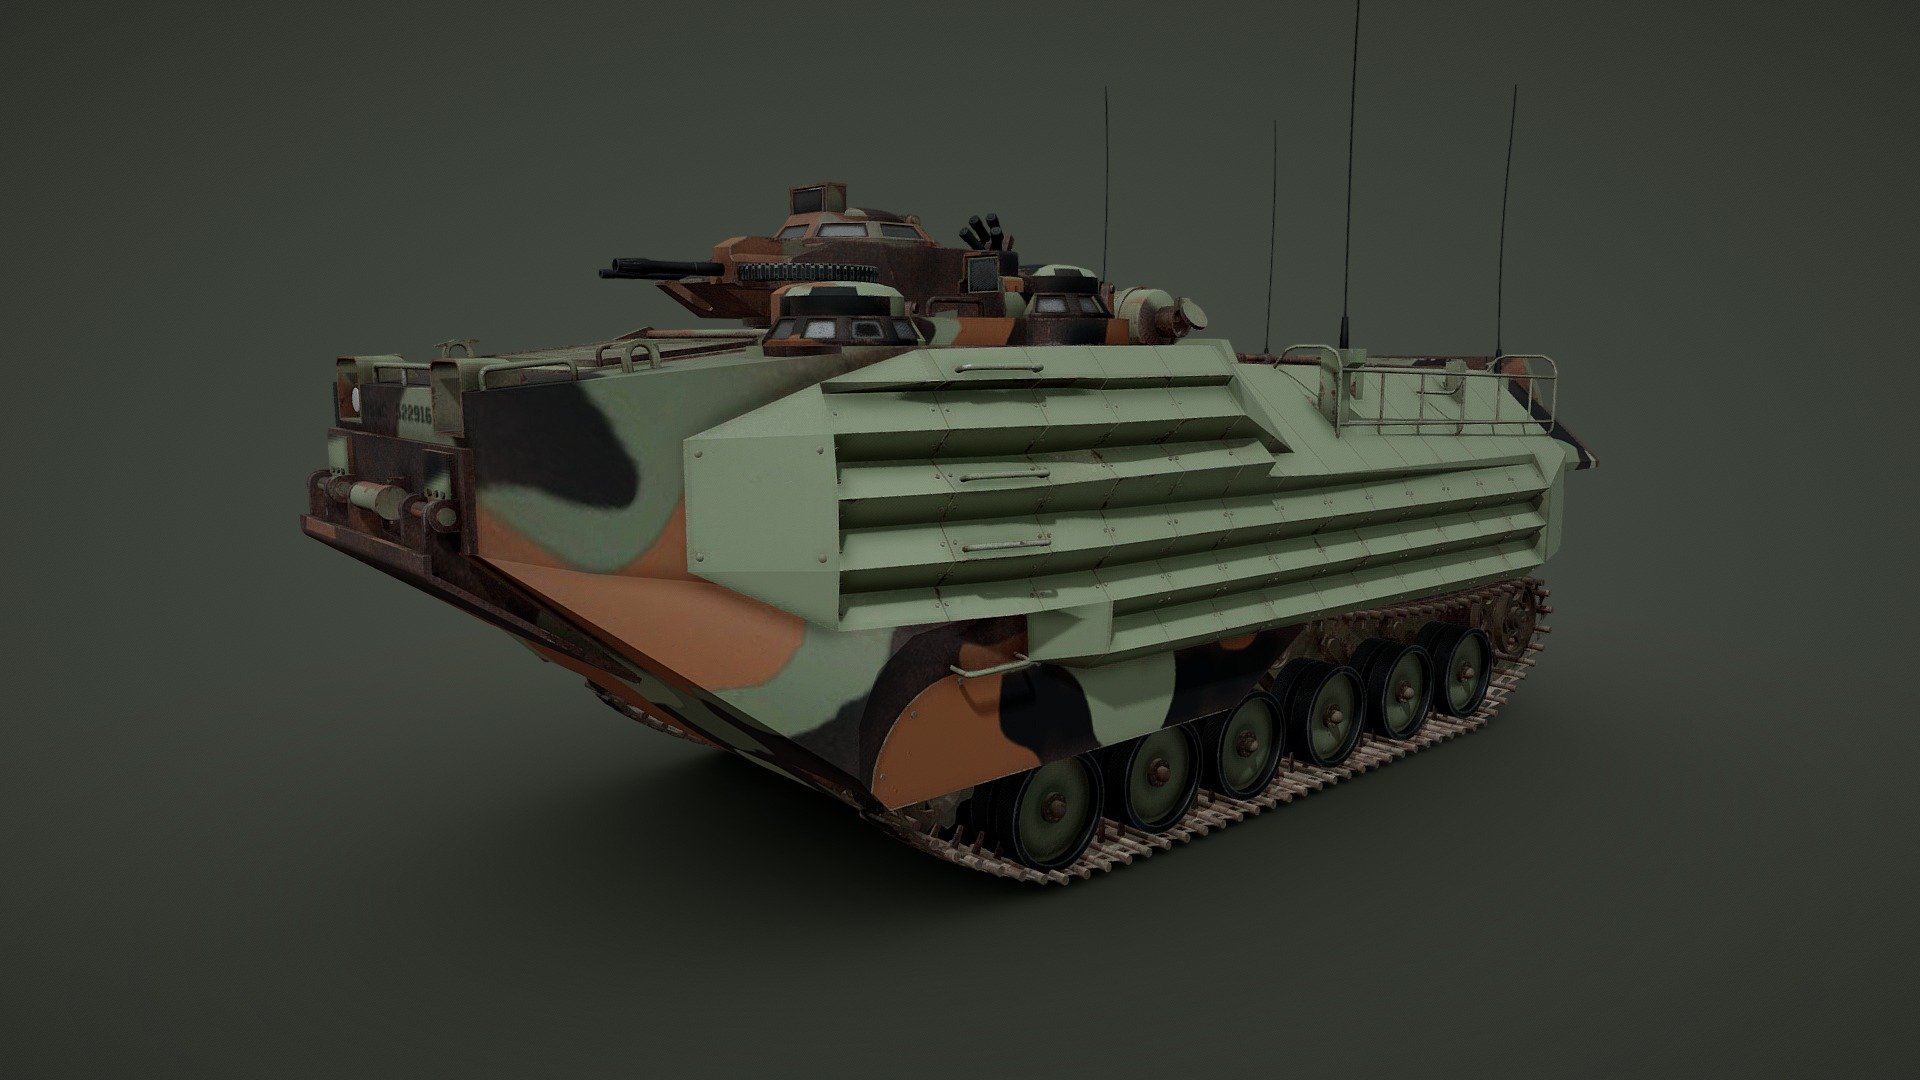 The AAV-P7/A1 is the current amphibious troop transport of the United States Marine Corps. It is used by U.S. Marine Corps Amphibious Assault Battalions to land the surface assault elements of the landing force and their equipment in a single lift from assault shipping during amphibious operations to inland objectives and to conduct mechanized operations and related combat support in subsequent mechanized operations ashore. It is also operated by other forces. Marines call them &ldquo;amtracs